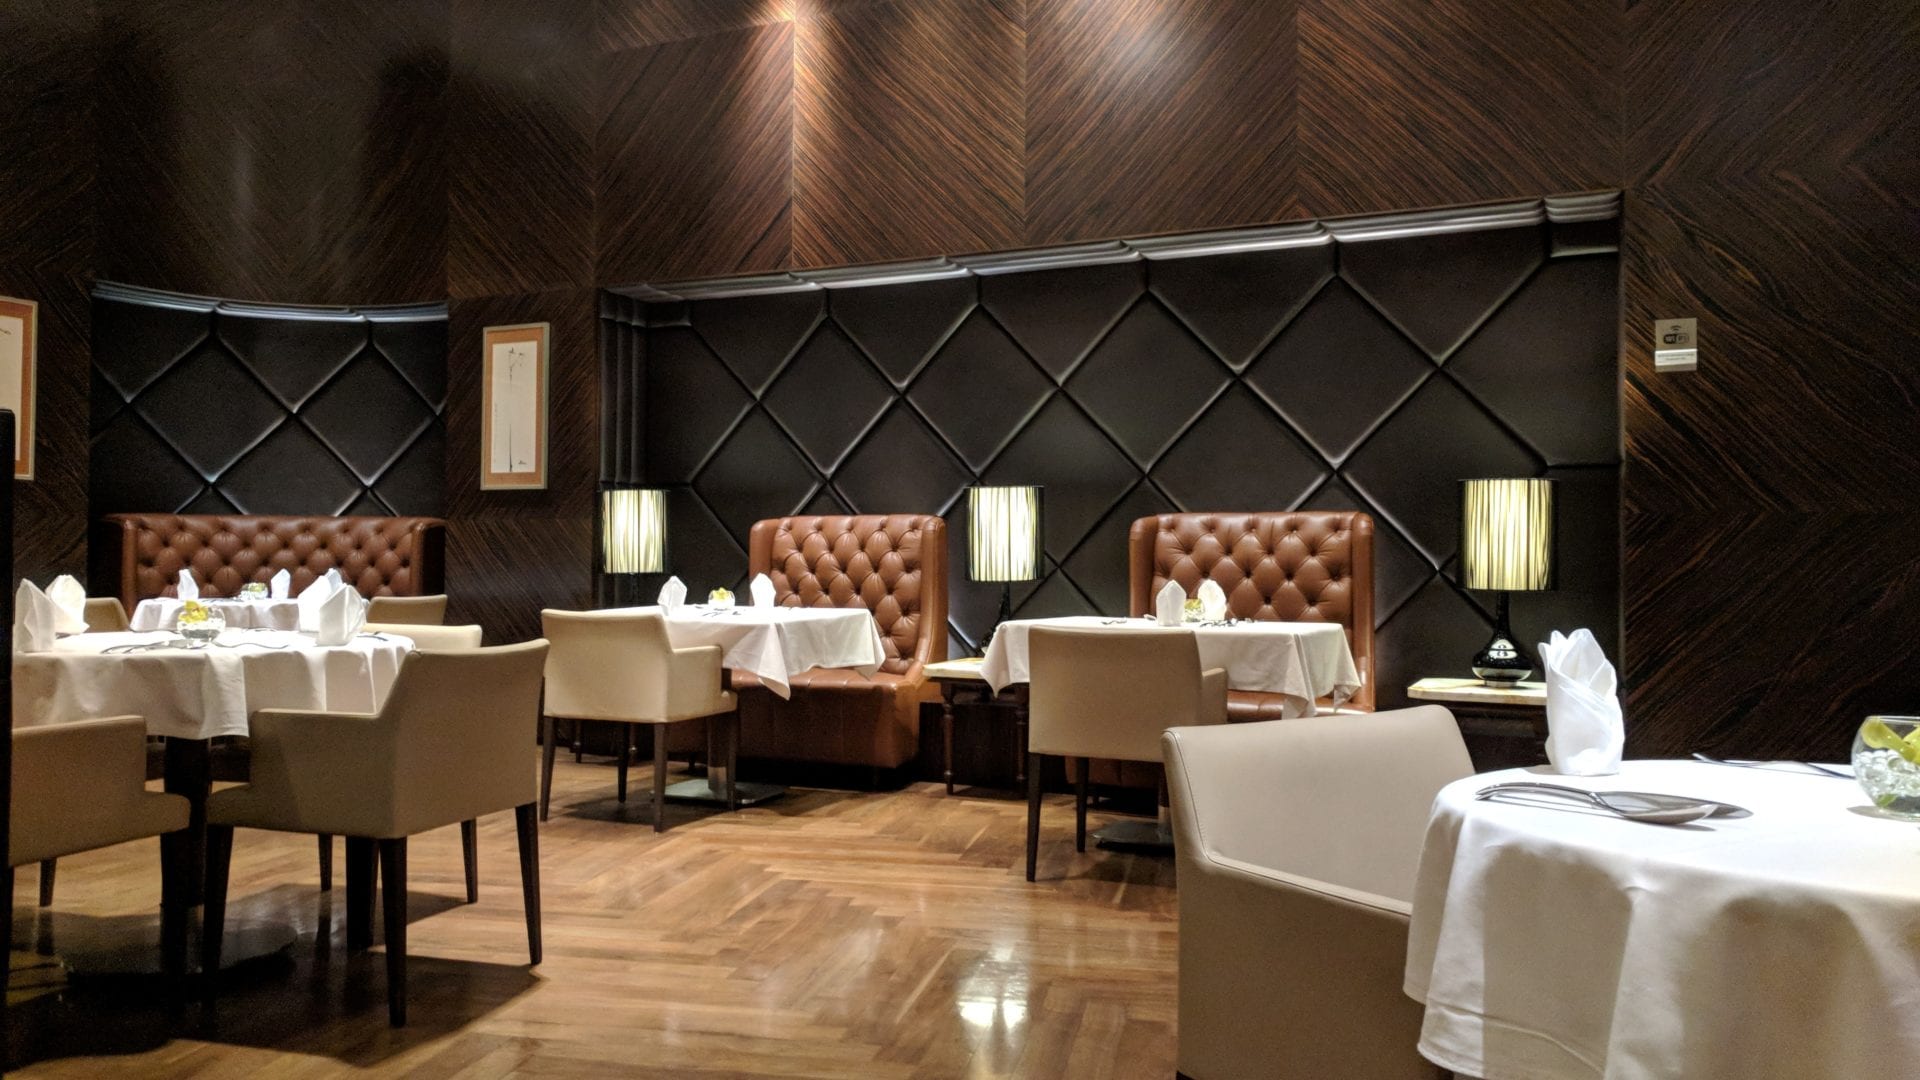 Singapore Airlines Private Room Dining Room